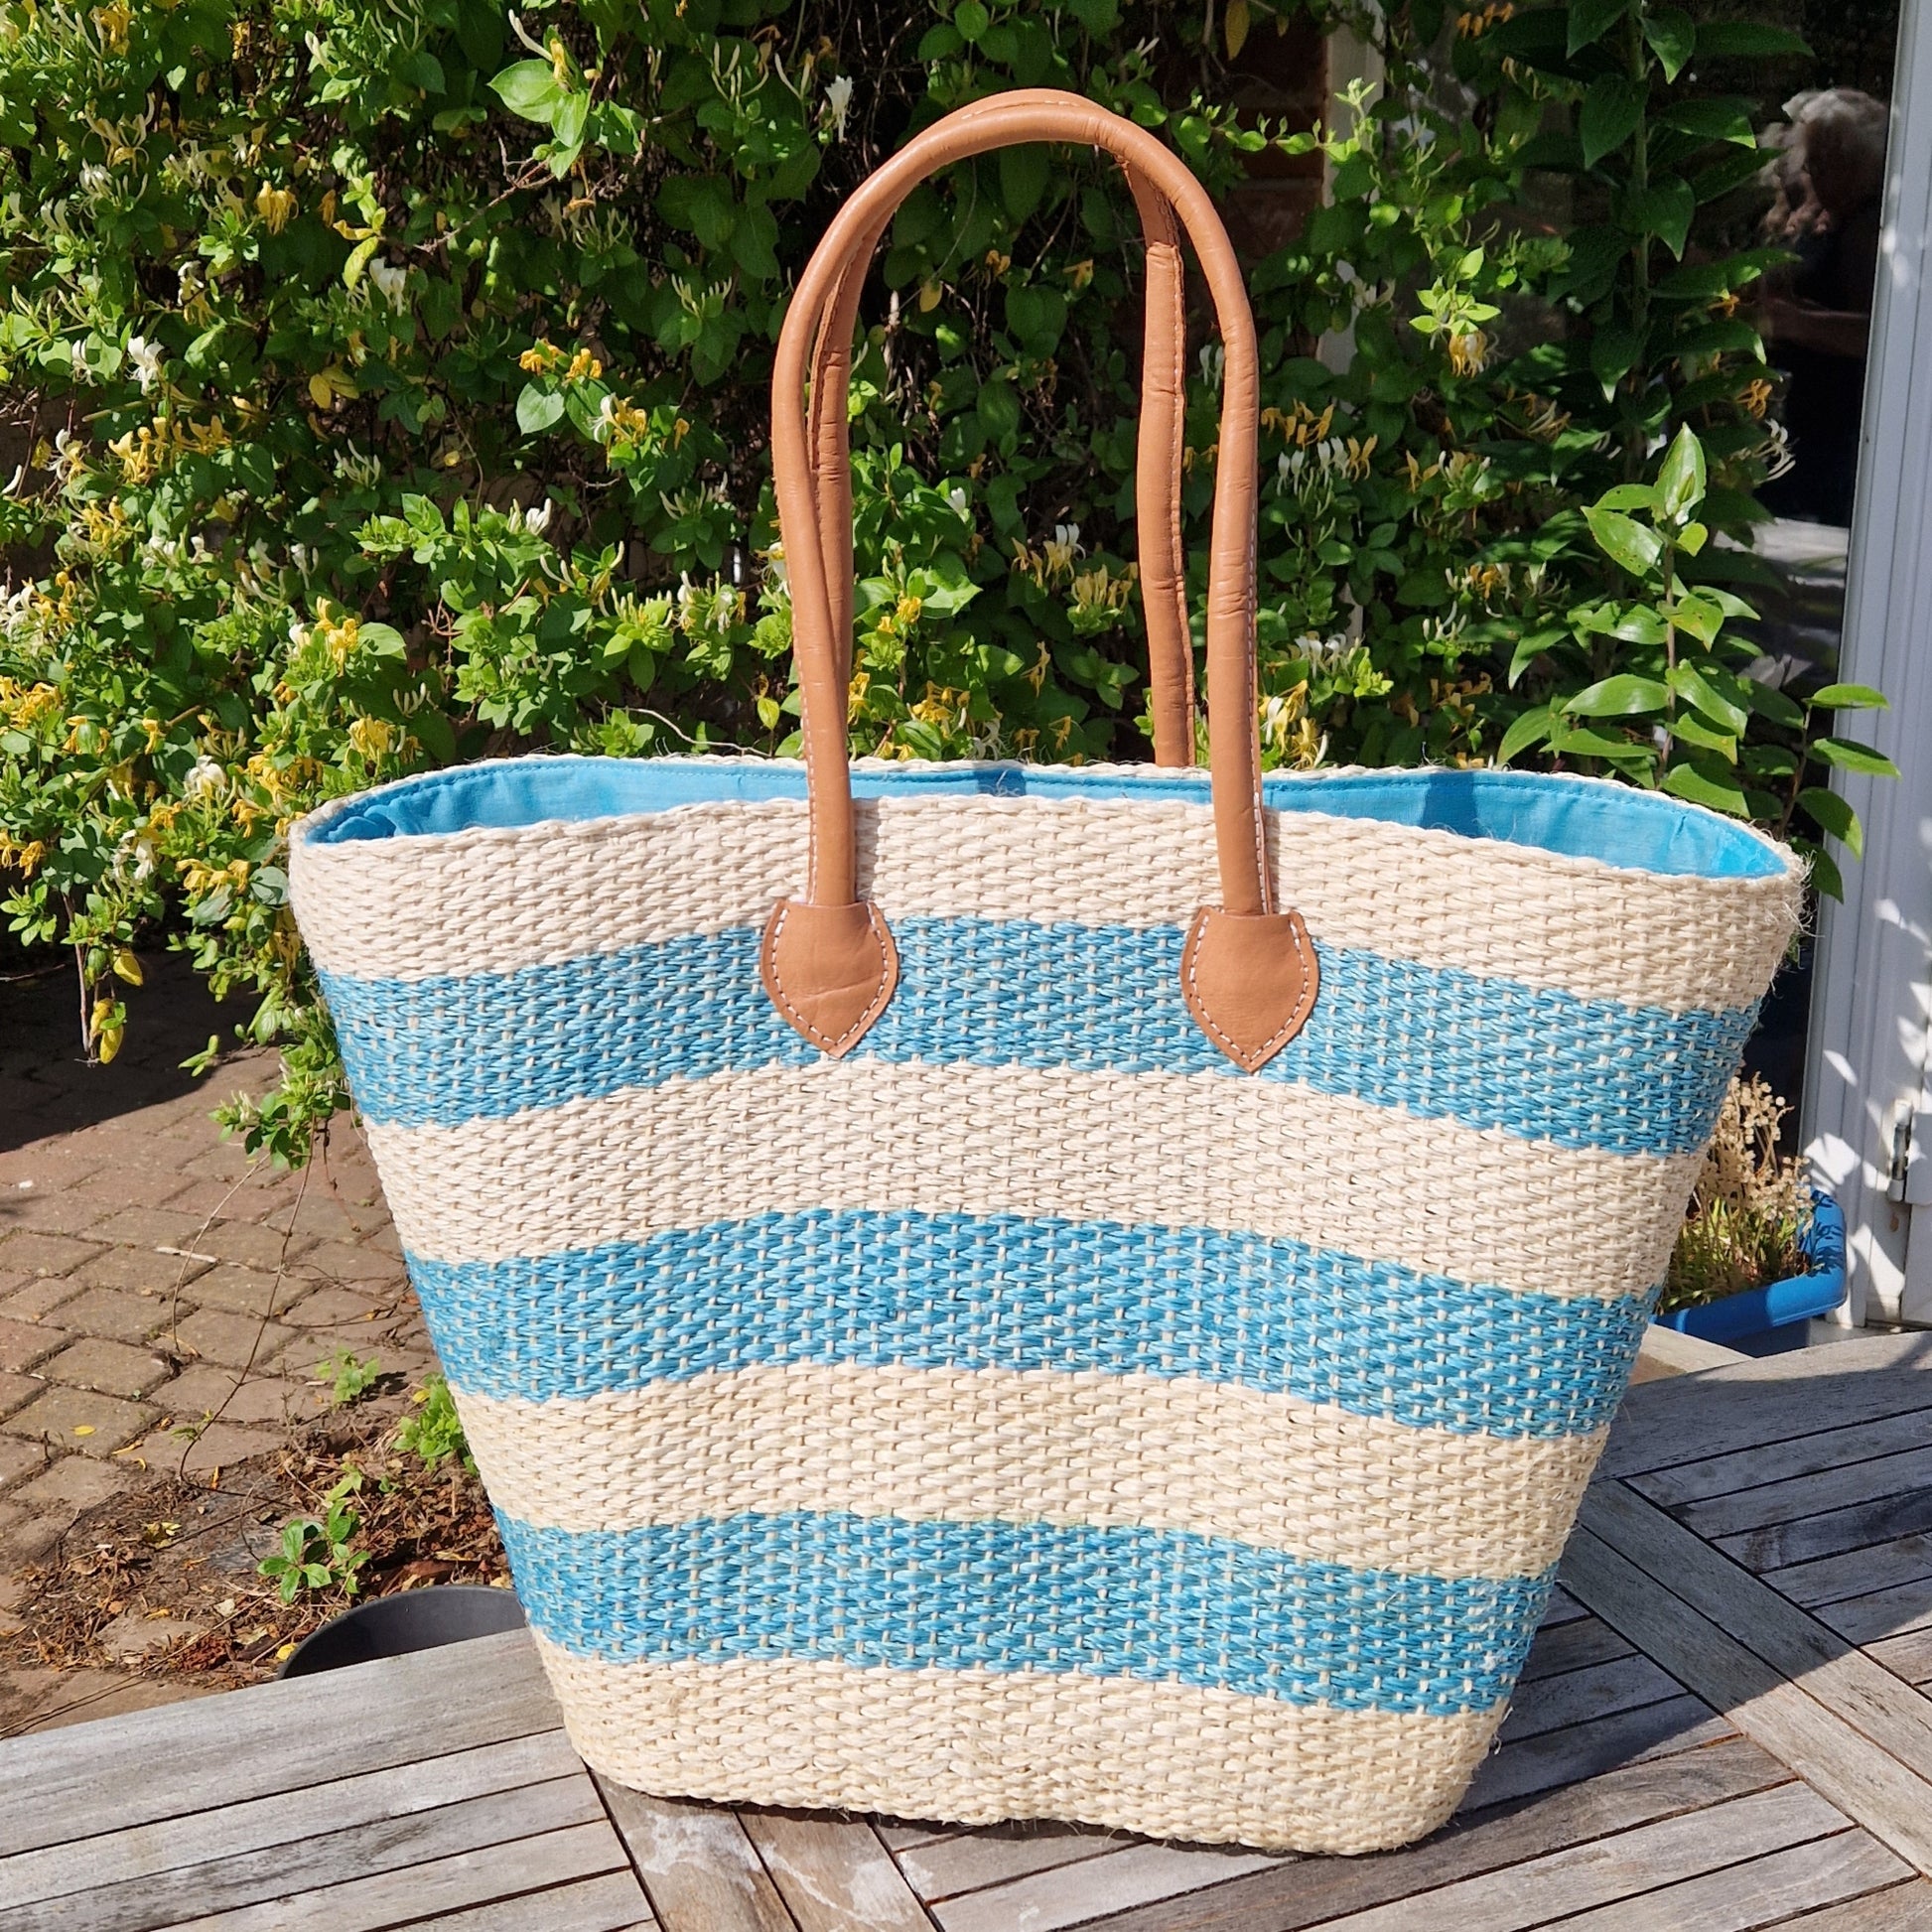 Sisal basket with fresh stripes of turquoise and white, leather handles